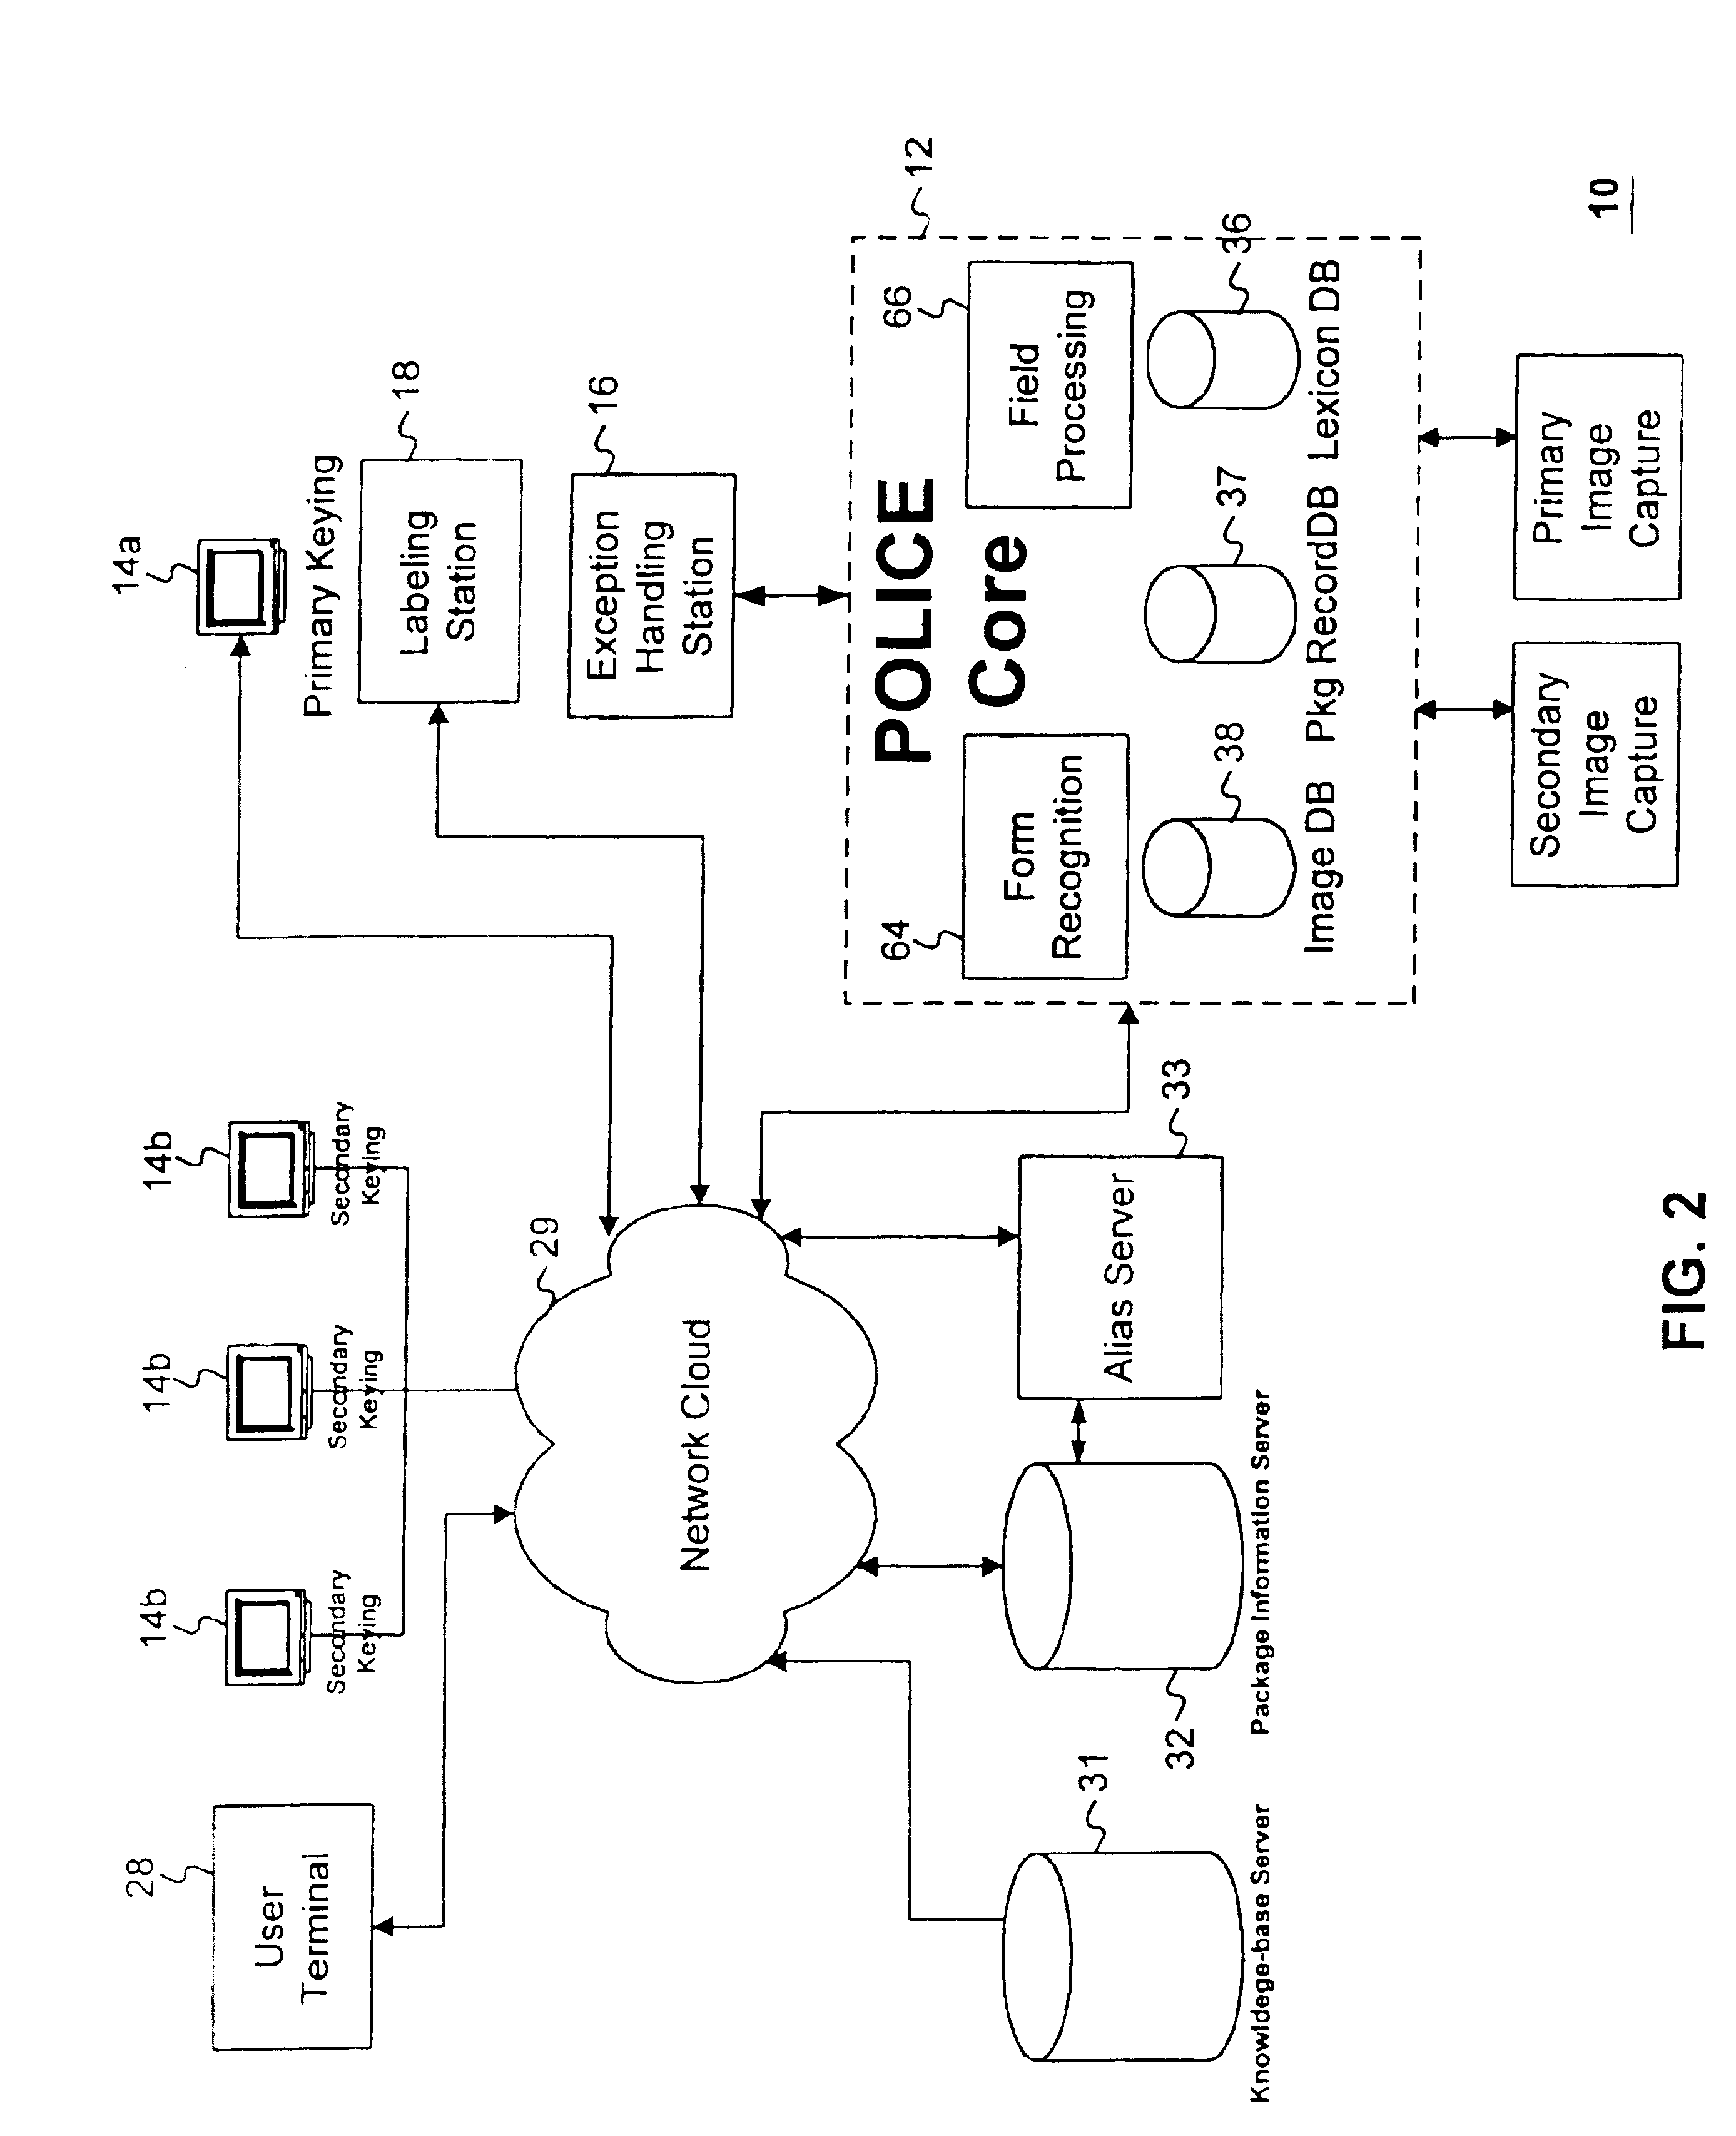 Method and apparatus for reading and decoding information